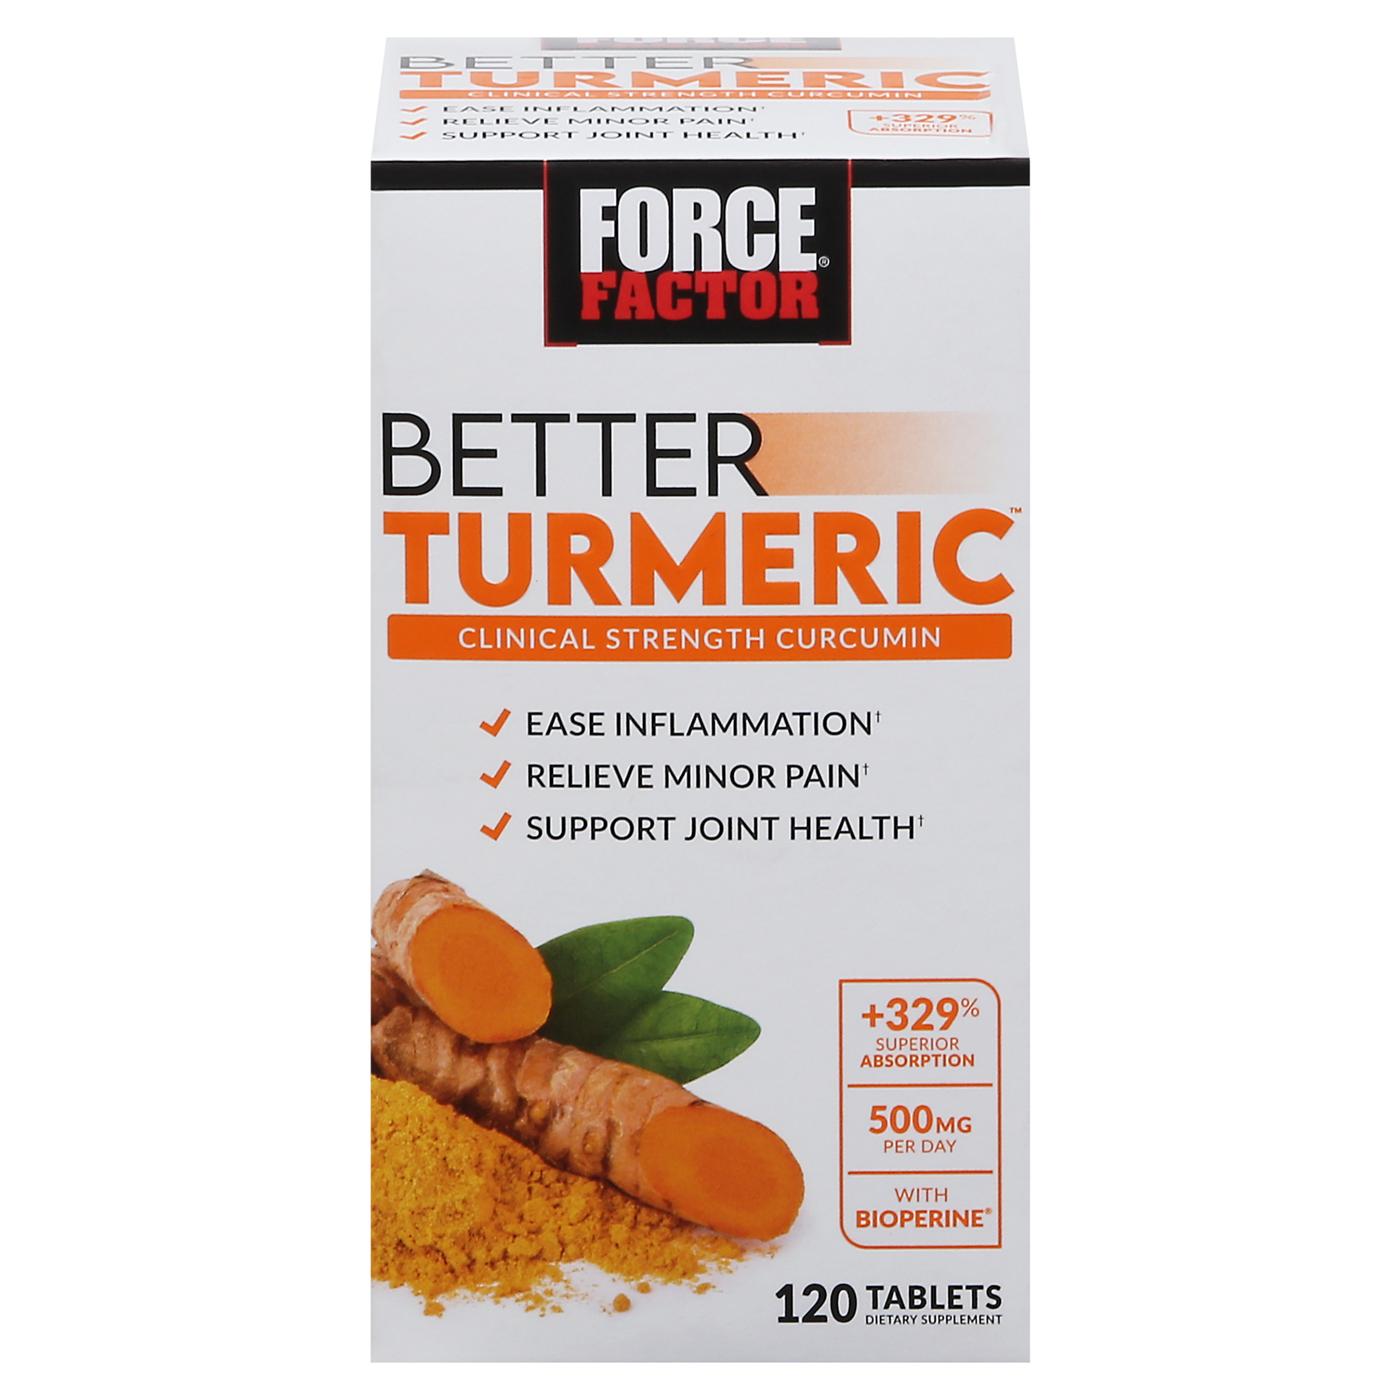 Force Factor Better Turmeric Tablets; image 1 of 3